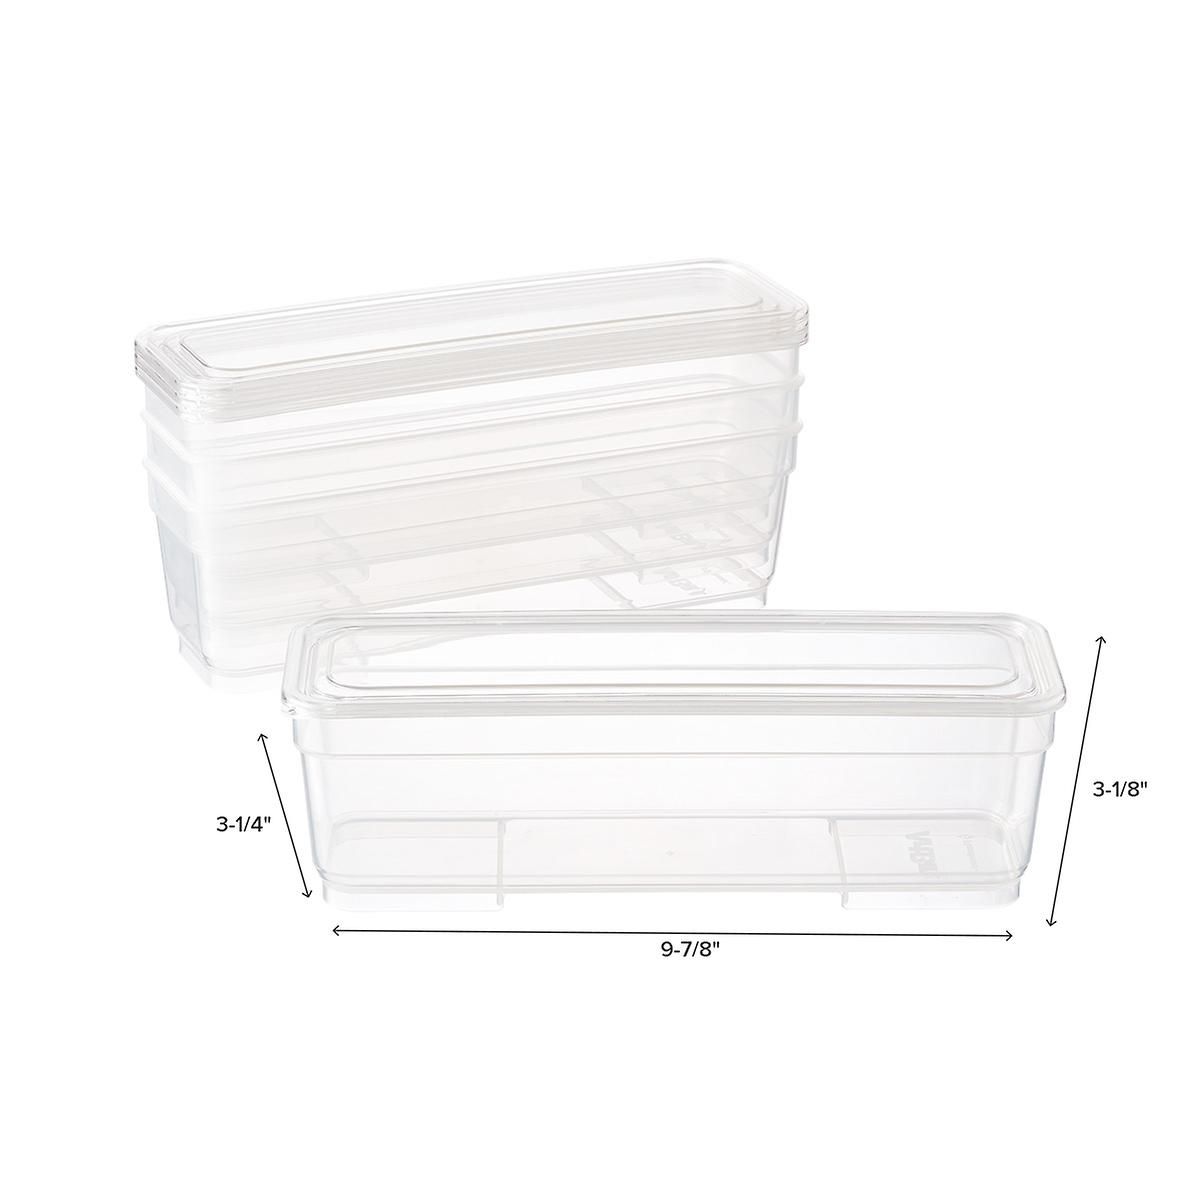 ArtBin Clear Storage Bins with Lids Pkg/4 | The Container Store